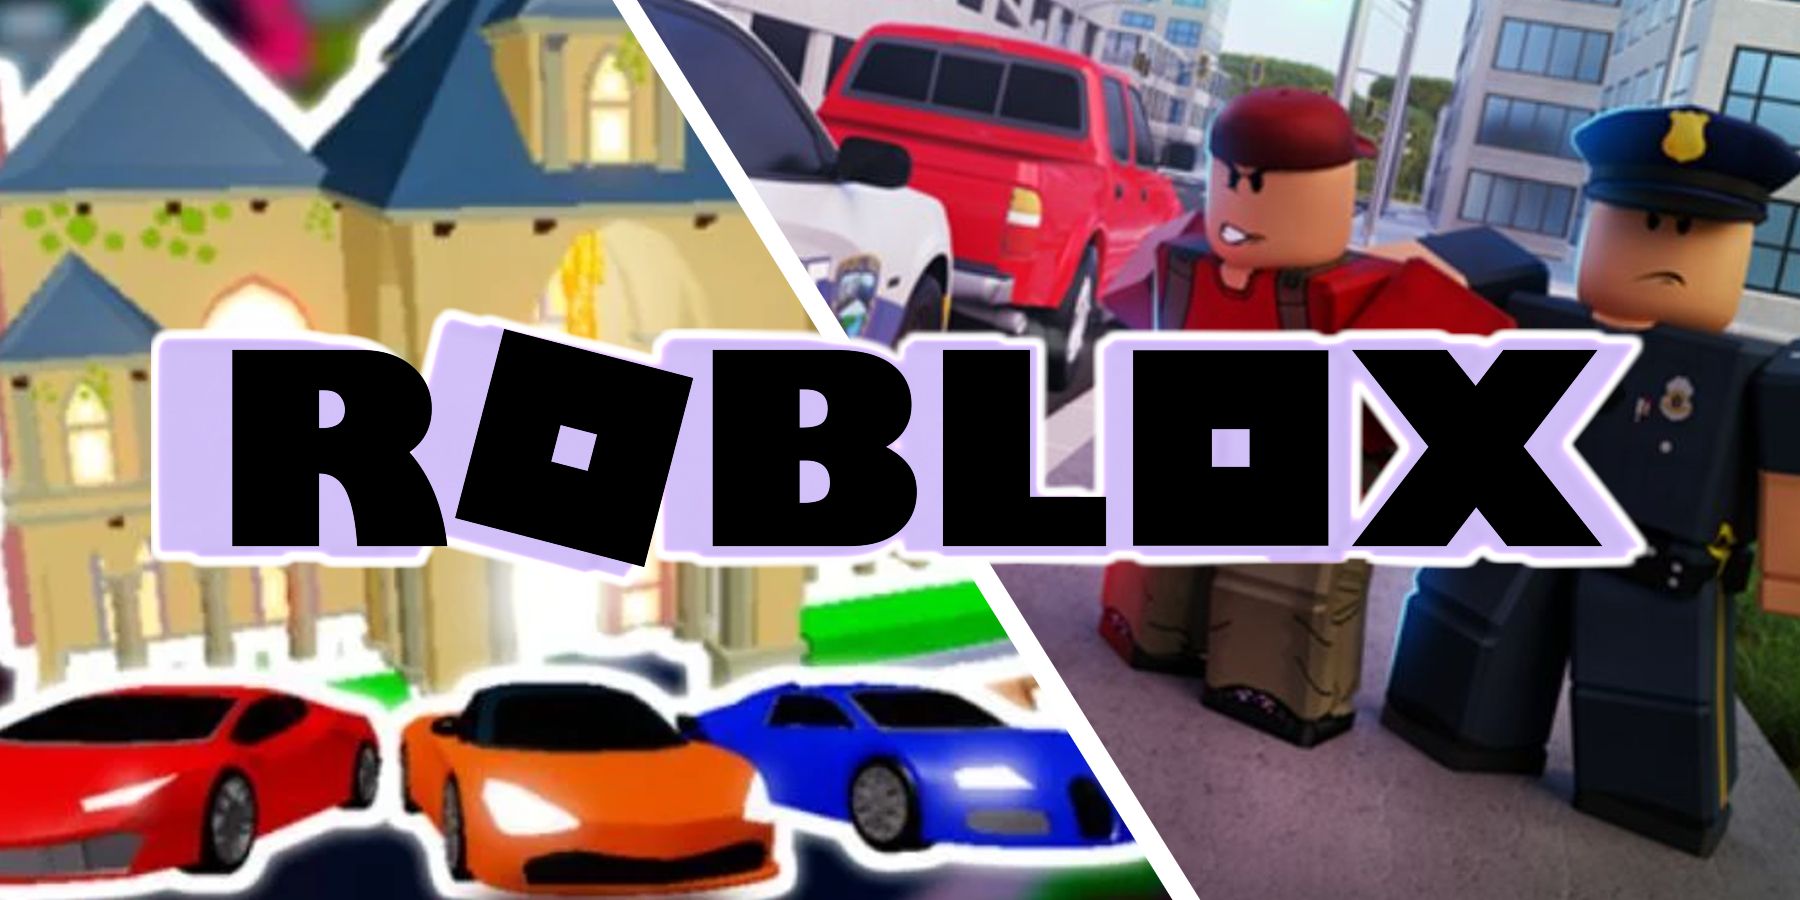 Best Free Building Games On Roblox